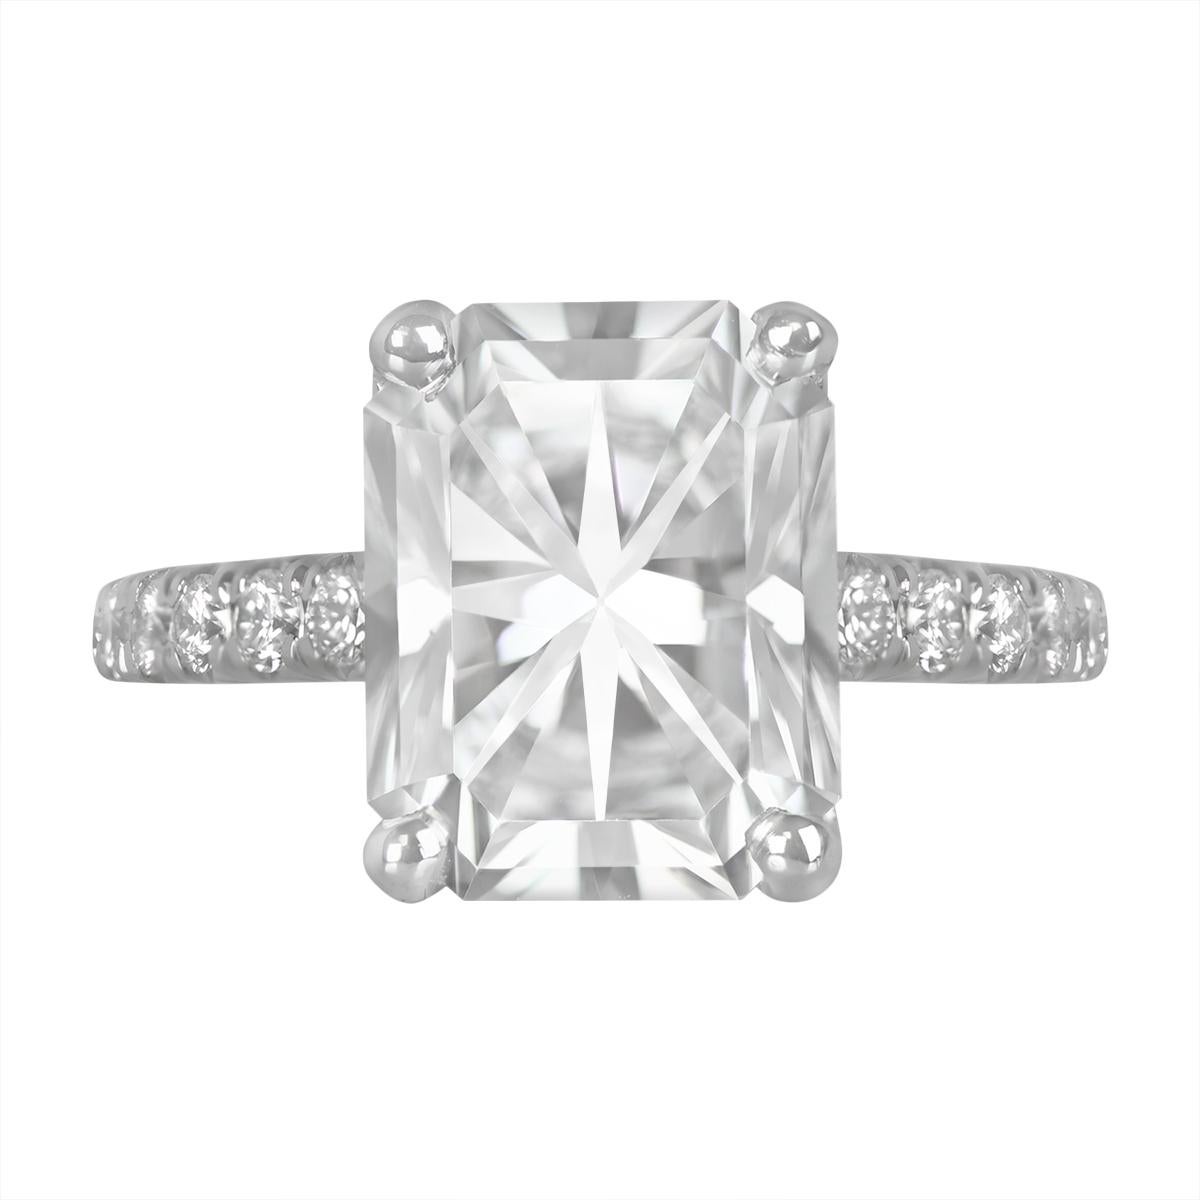 Prepare to be dazzled by the sheer magnificence of this estate platinum and diamond ring. At its core shines a GIA-certified radiant cut diamond, boasting an impressive weight of 3.01 carats, with a brilliant F color and impeccable VS1 clarity. The